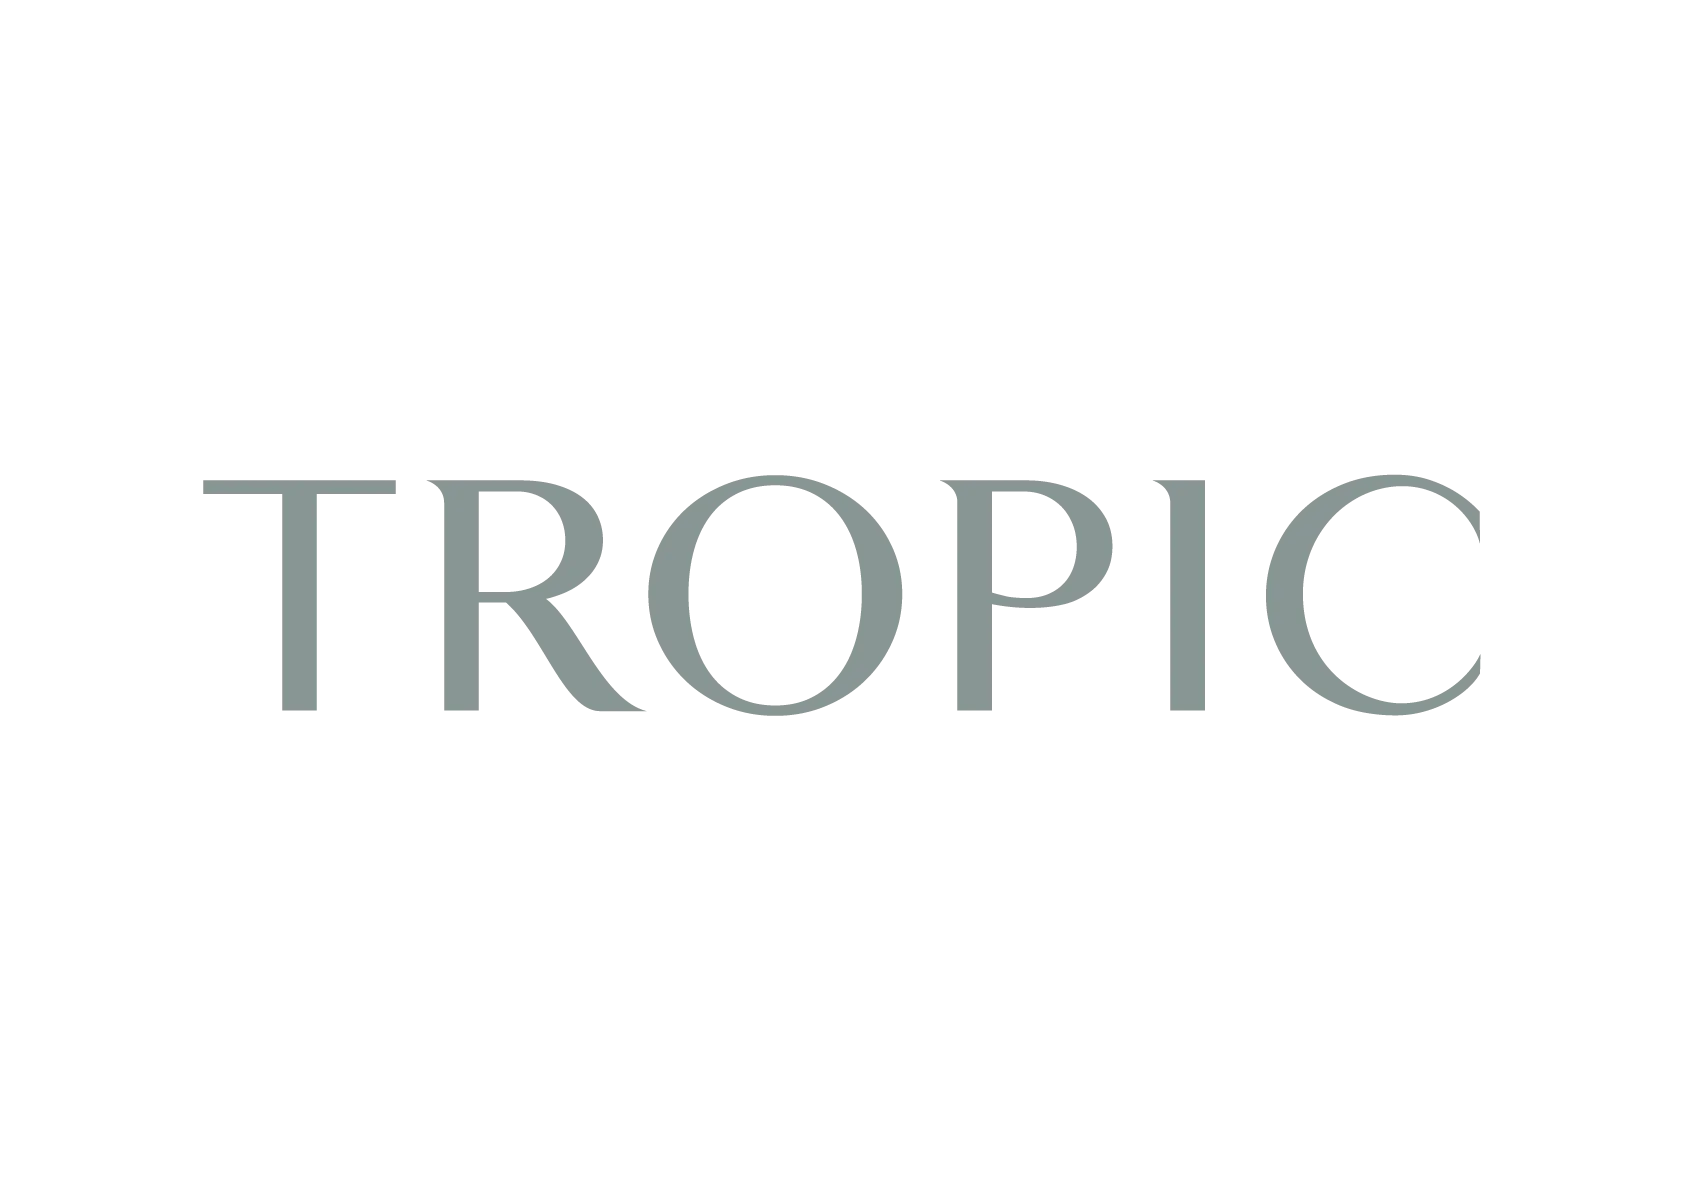 Tropic Skincare Free Delivery Code & Voucher Codes